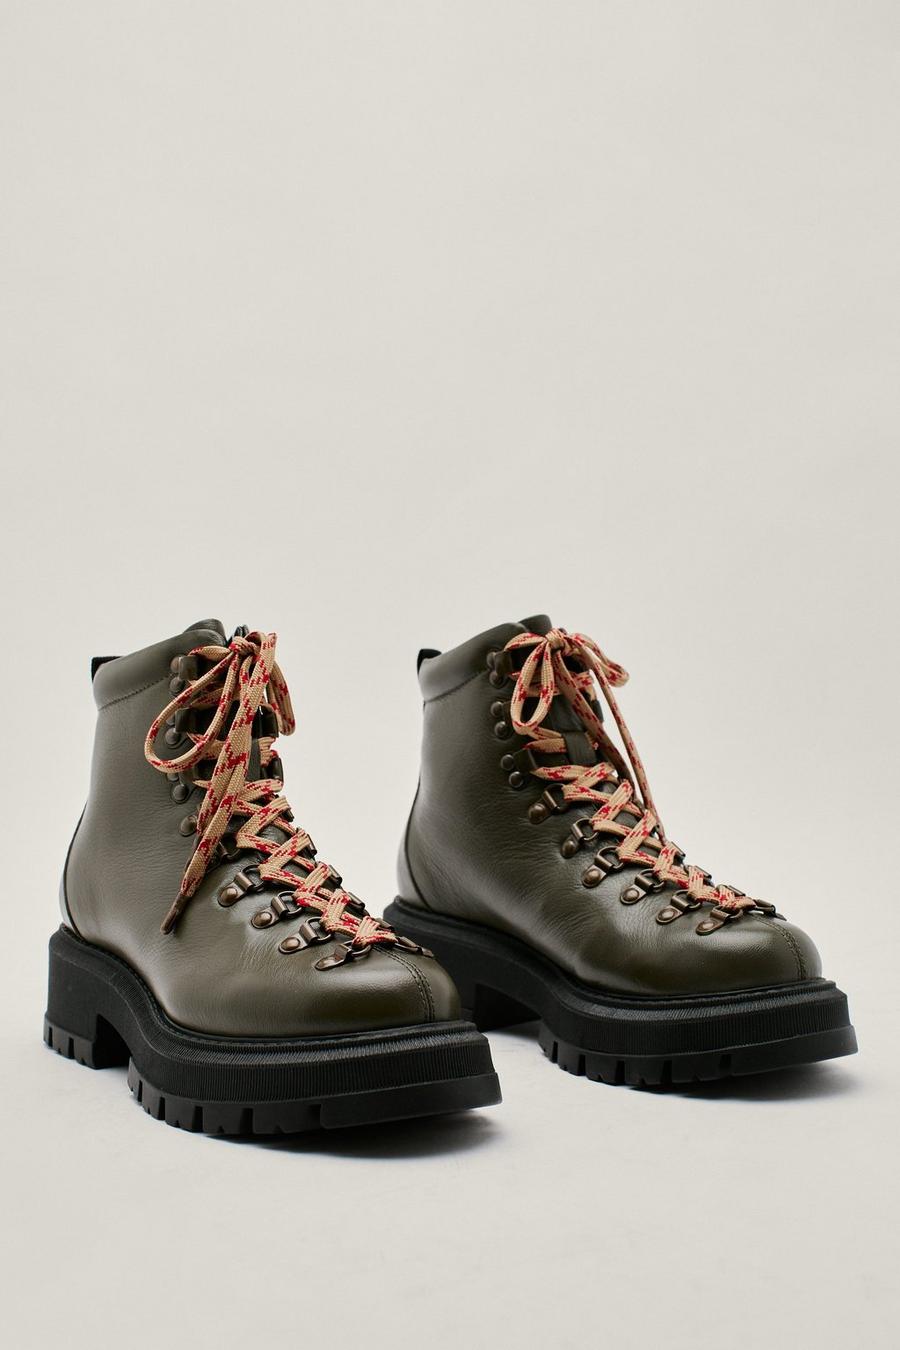 Contrast Lace Chunky Real Leather Hiker Boots